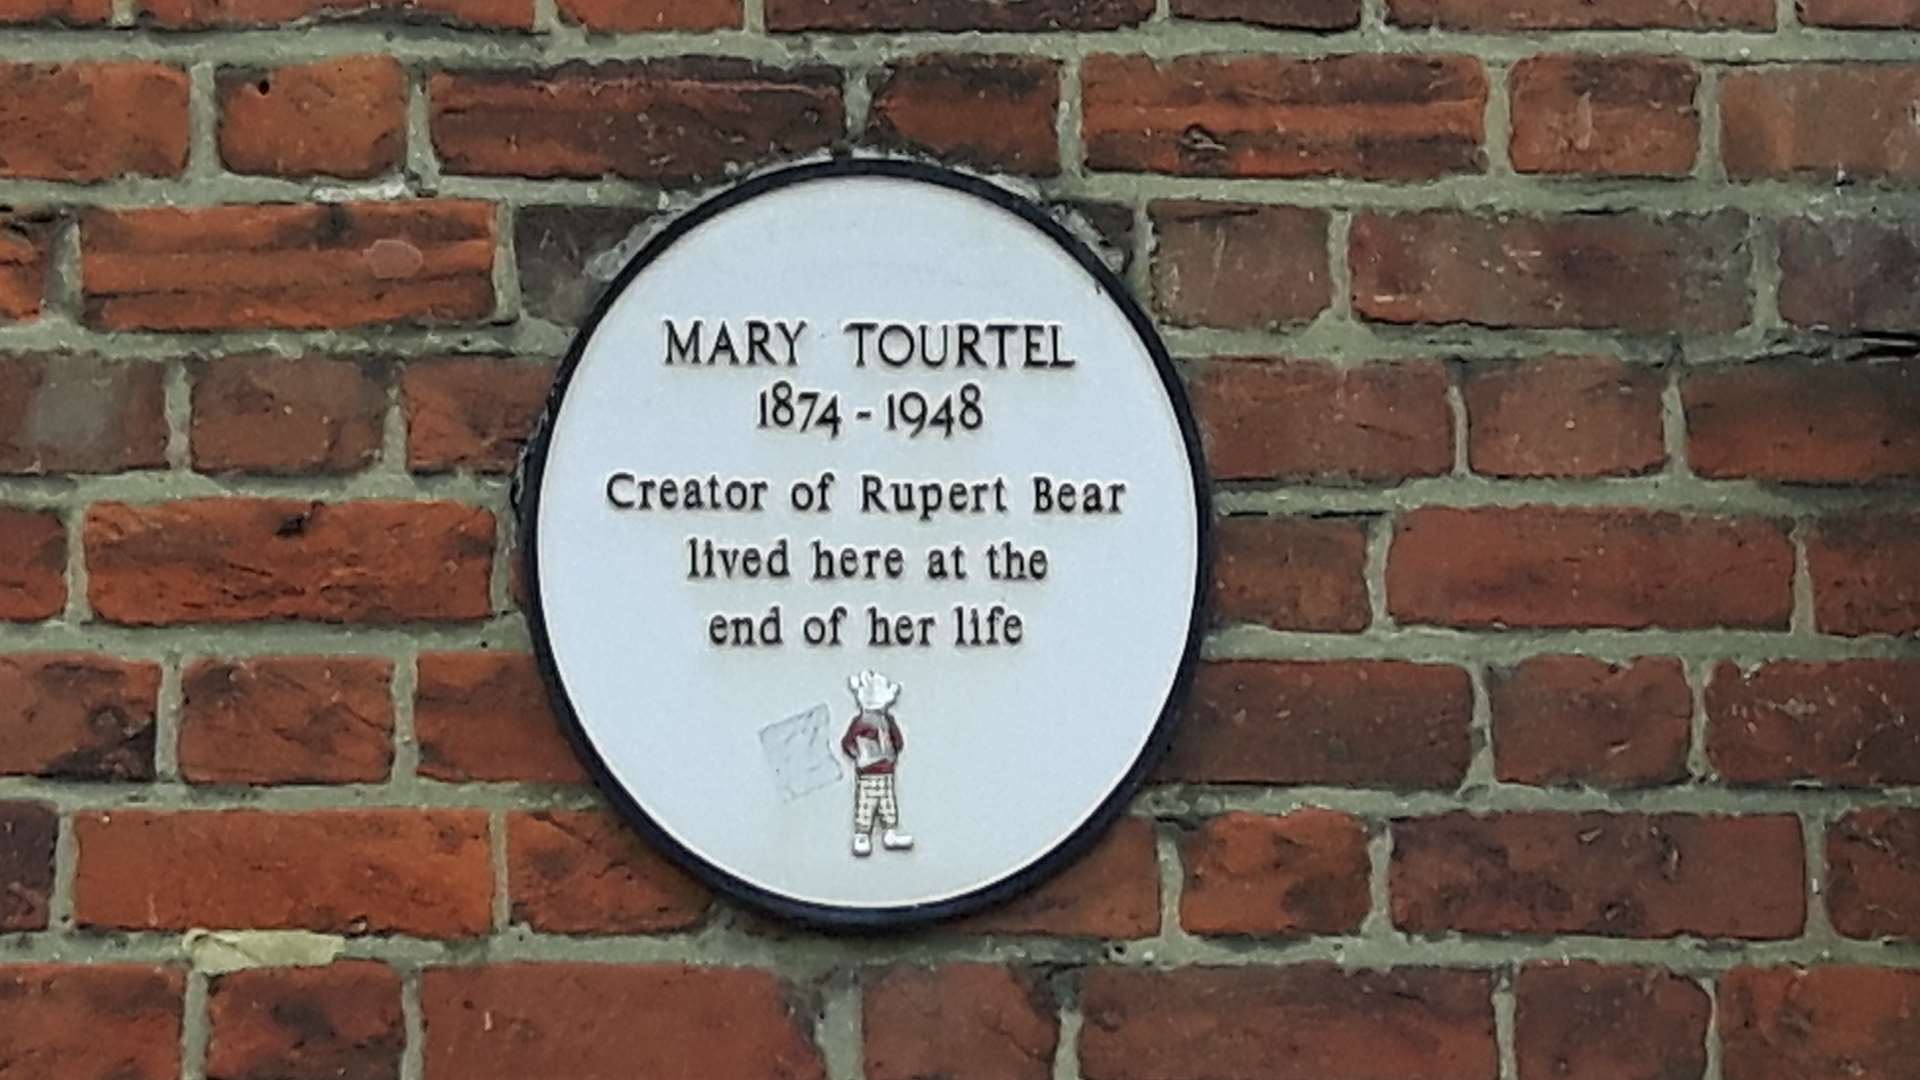 Mary Tourtel is well known the world over as the Rupert Bear creator